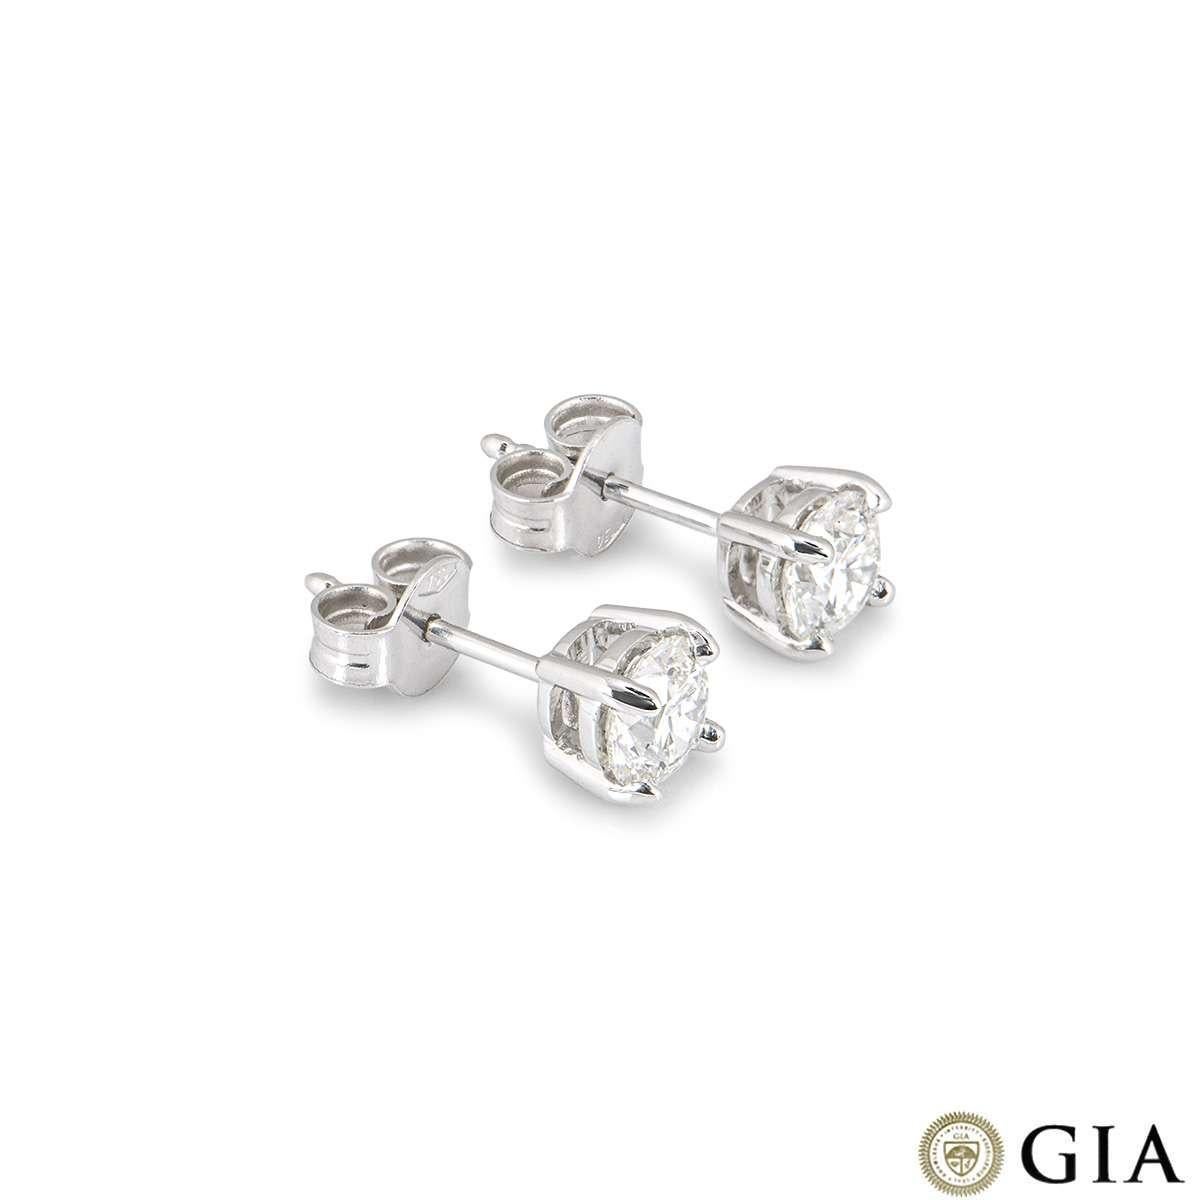 A pair of 18k white gold diamond stud earrings. The earrings feature round brilliant cut diamonds in a 4 claw setting. Both diamonds weigh 0.60ct each, one is G colour and the other is H colour, both VS2 in clarity. The earrings have post and